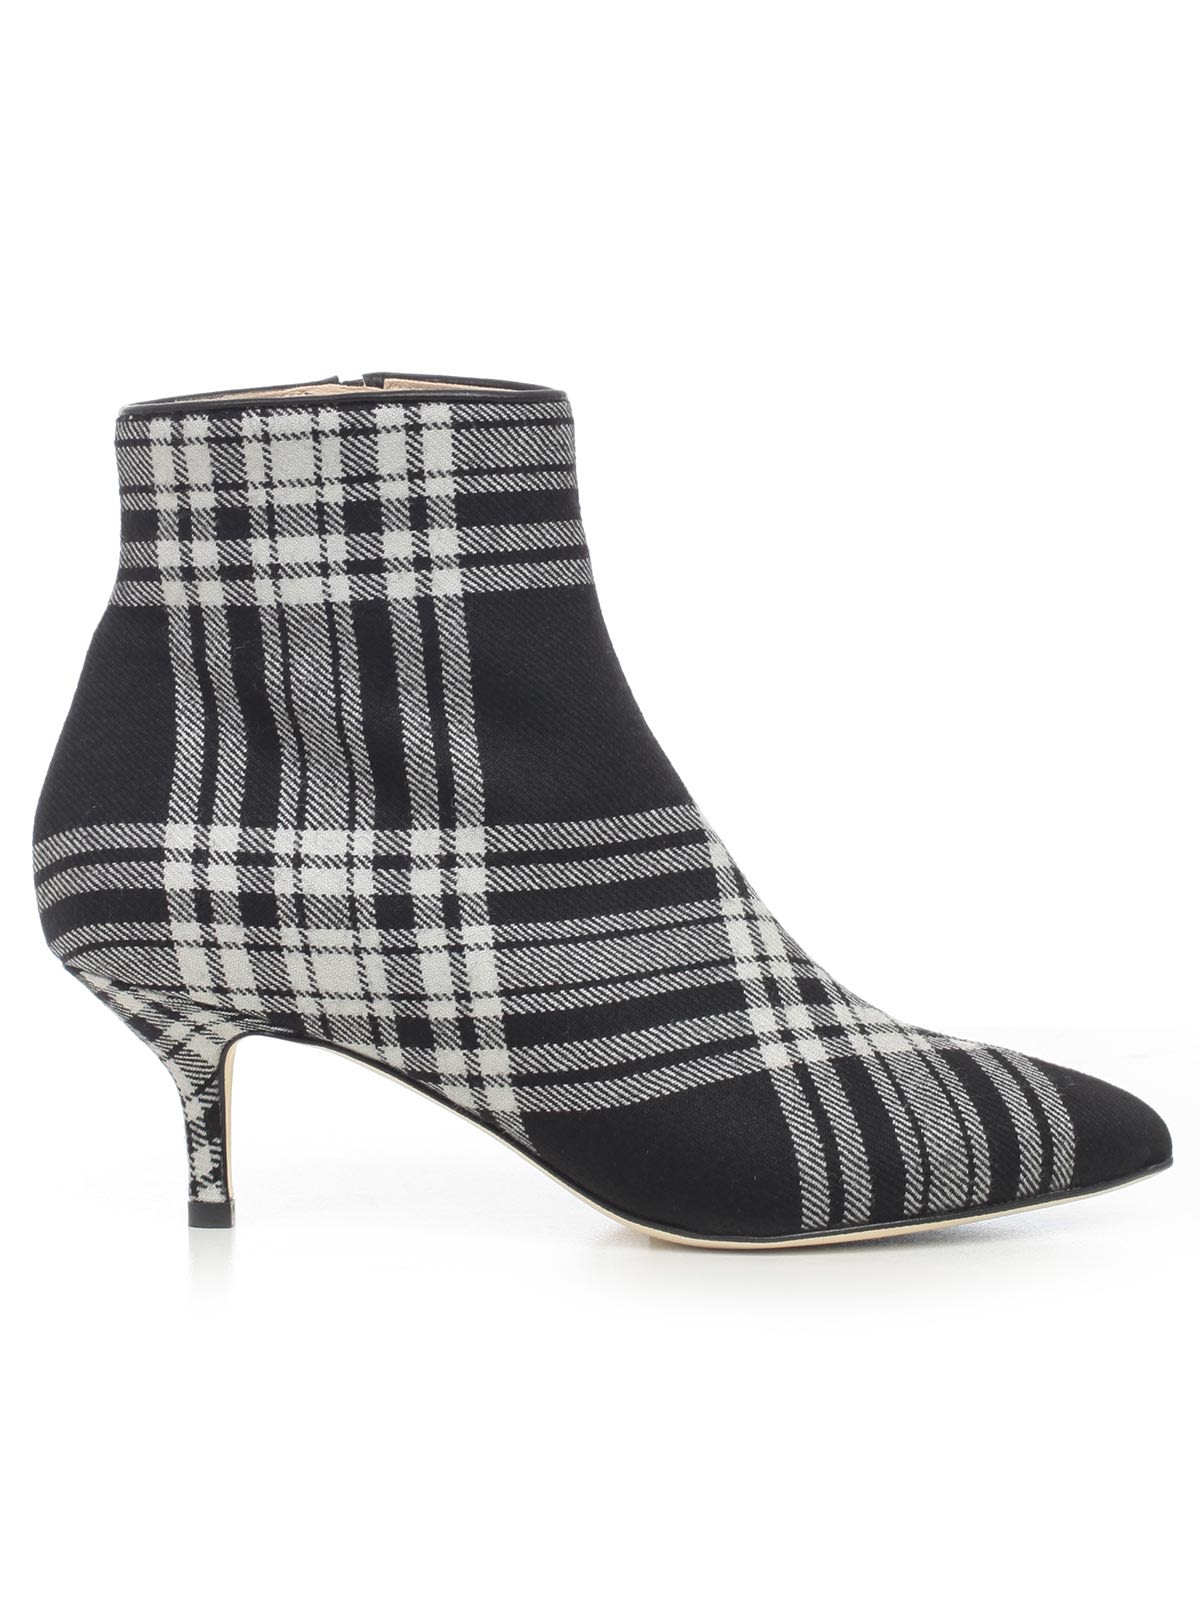 Polly Plume CHECKED ANKLE BOOTS